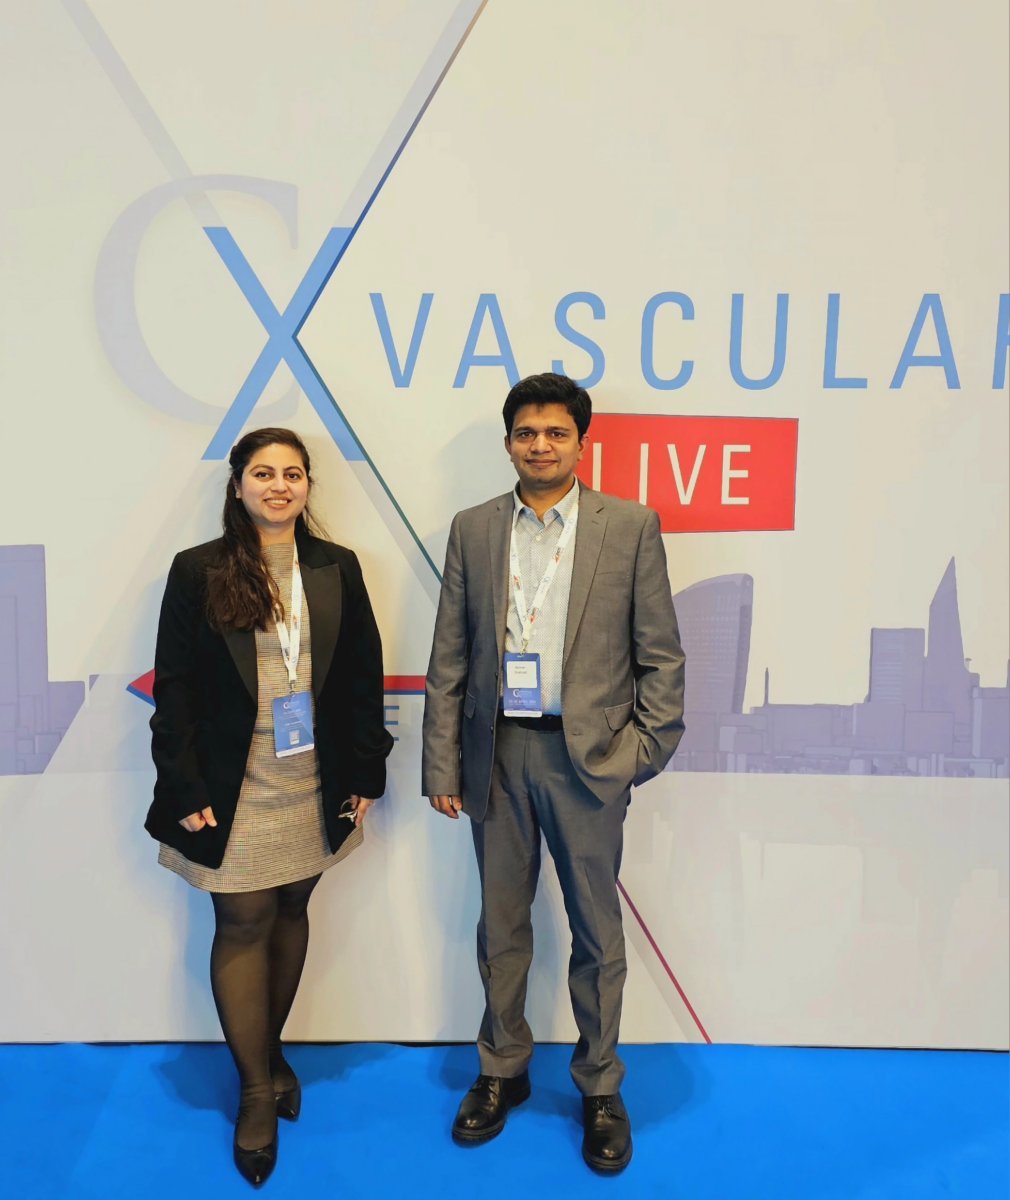 3 days of great academic activity, innovative technology and debates from Vascular experts around the world. 
#CX Symposium
#VascularSurgeon